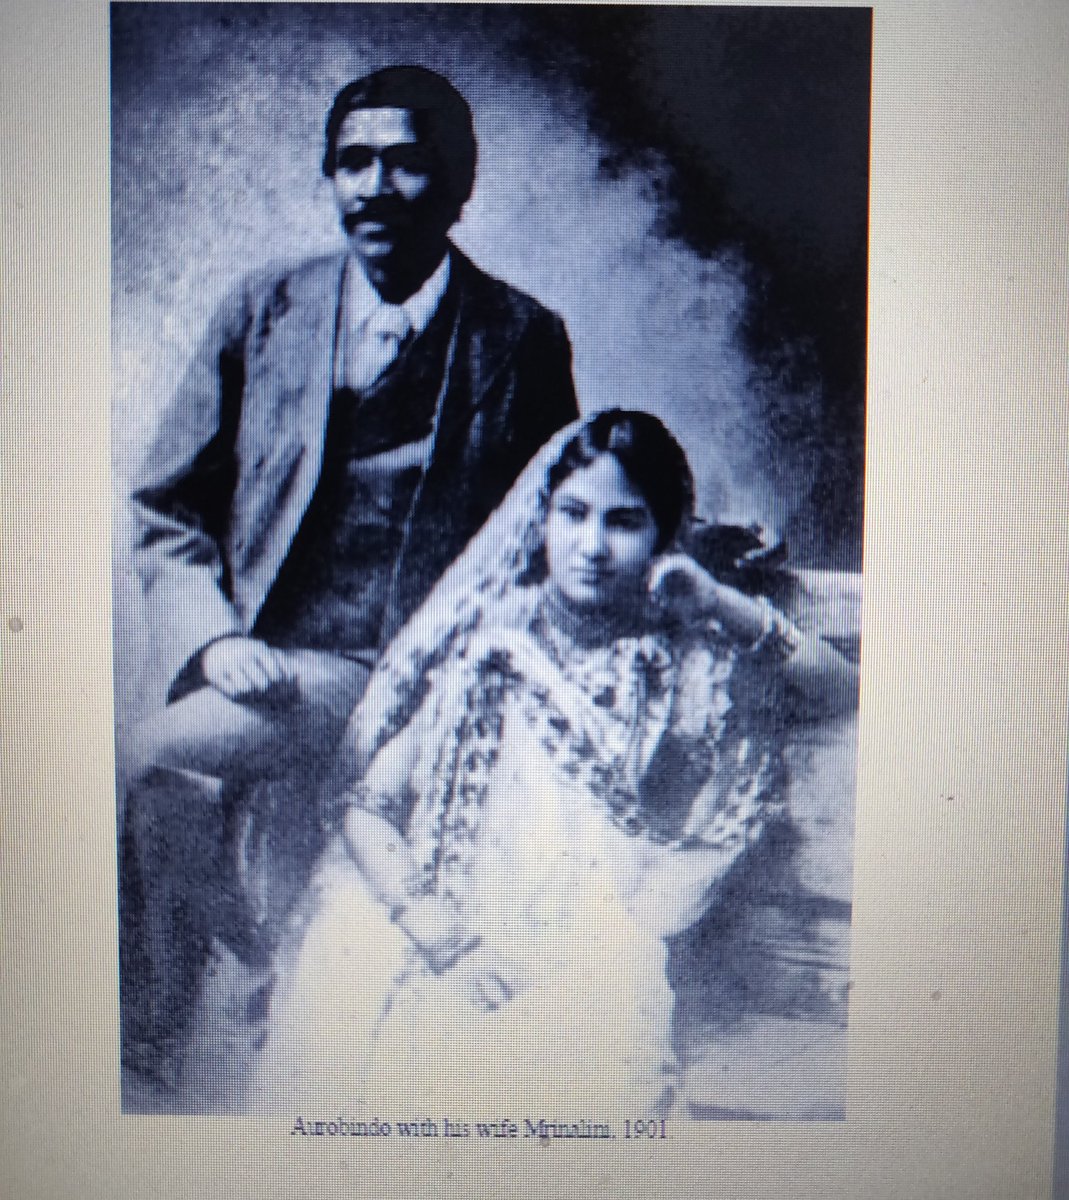 Aurobindo & his wife Mrinalini, 1901.Best part is she was a Girl from Shillong, and Aurobindo too expressed his displeasure in writing when Sylhet was separated from Bengal & attached to Assam.Will cover soon, on our Shillong Girl, Mrinalini.